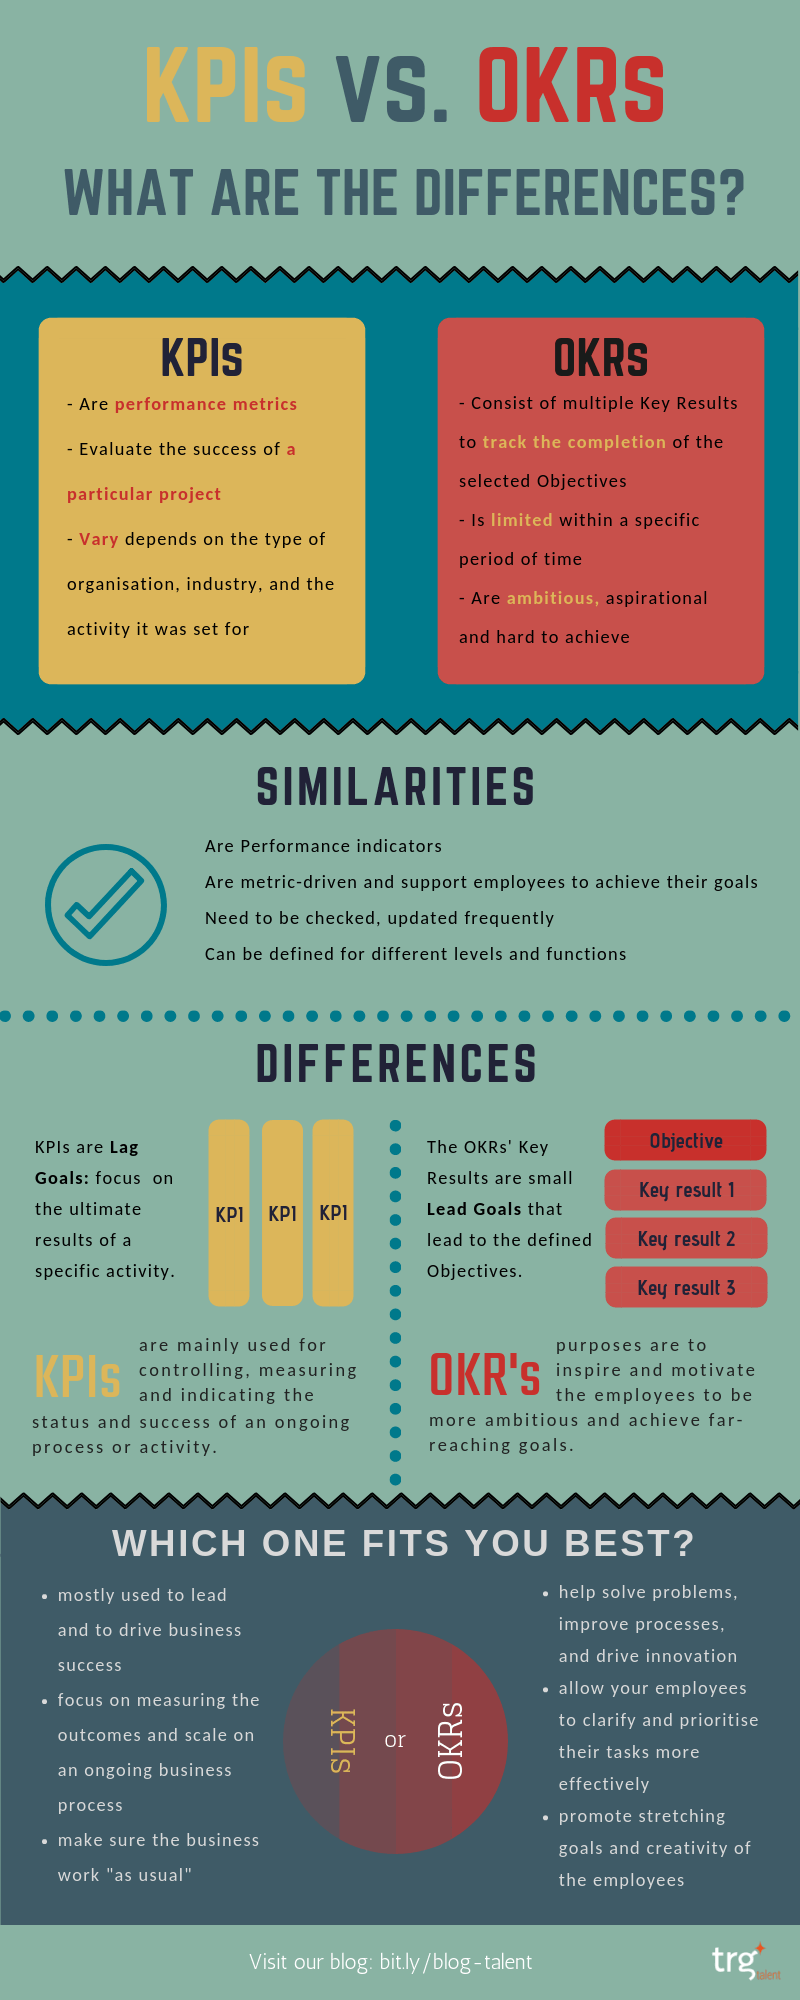 OKRs vs KPIs: Similarities and Differences 